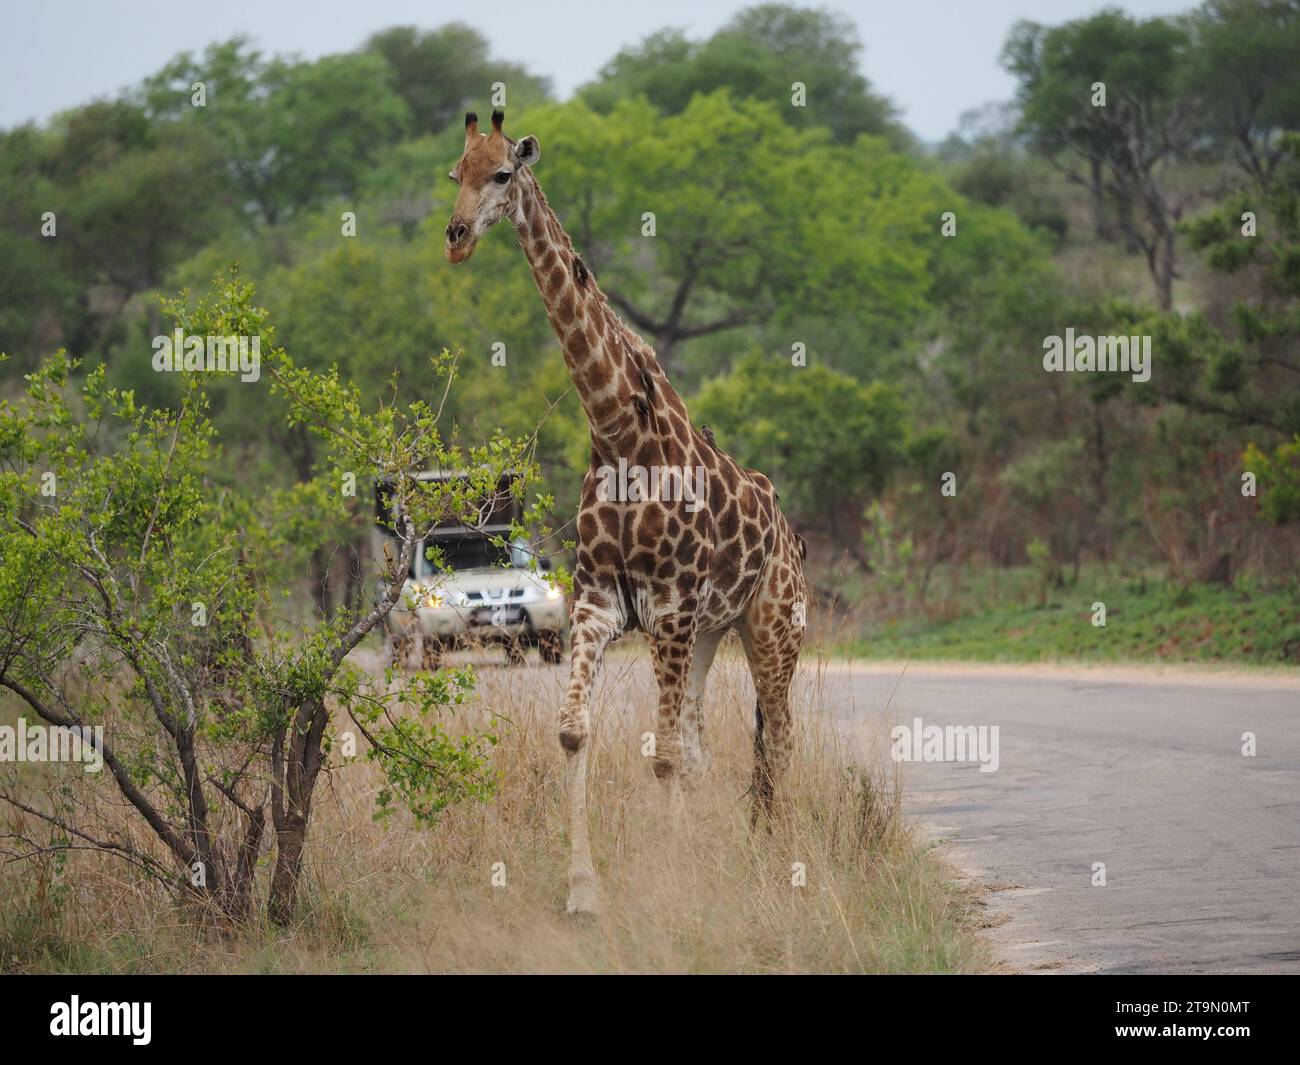 Large giraffe crossing the road in the Kruger national park near Skukuza, South Africa, with safari vehicle in the distance Stock Photo